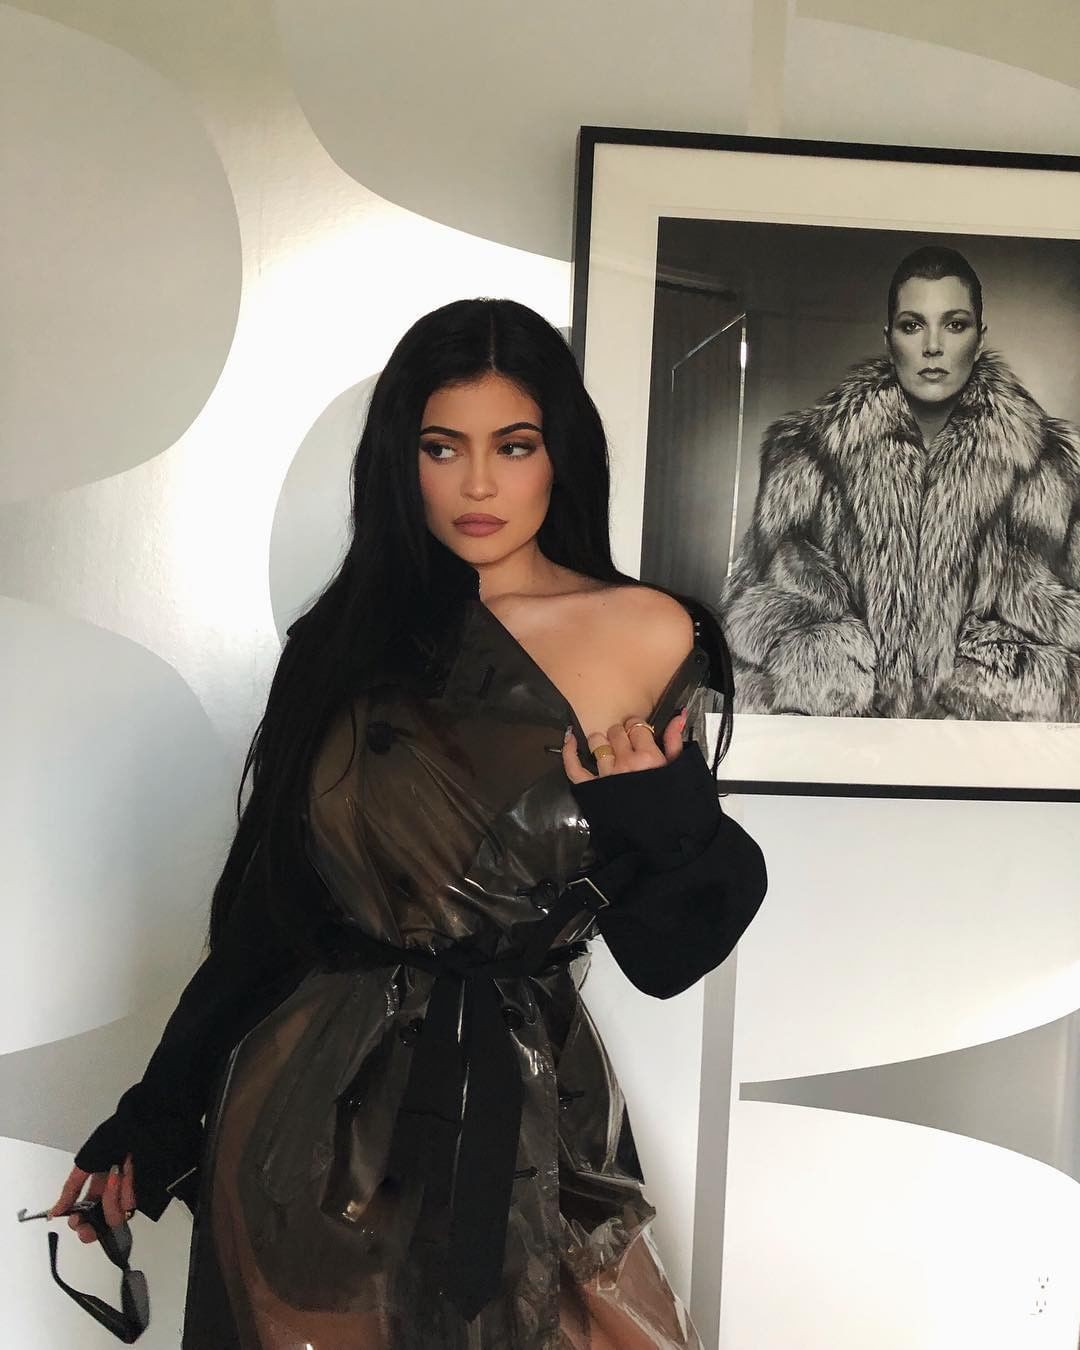 Instagram Outfits Kylie Jenner: FASHION,  Stylevore,  Vintage clothing,  luxury,  Vogue,  Hot kylie jenner,  instagram profile picture,  kylie jenner Photos,  kylie jenner Style,  kylie jenner Images,  kylie jenner Instagram,  kyliejenner,  haileybaldwin,  arianagrande  